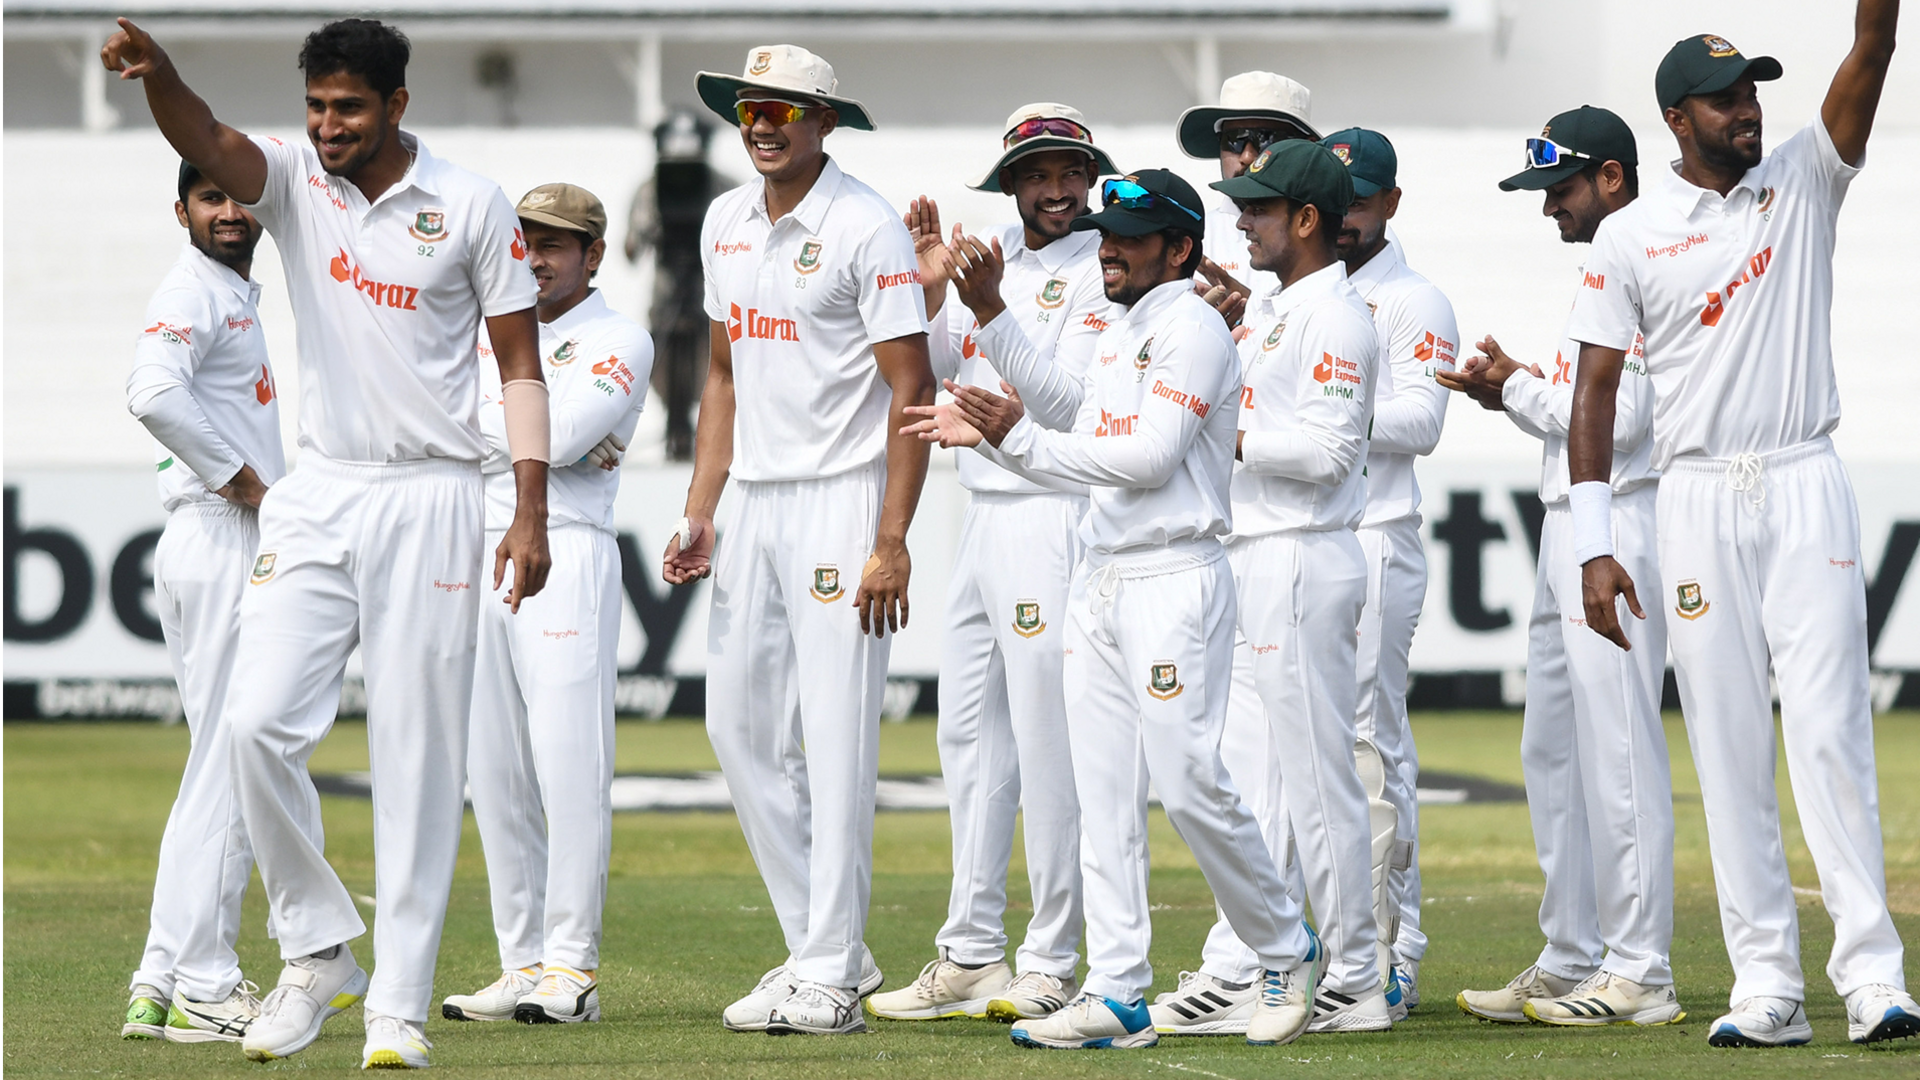 Bangladesh vs New Zealand, Test series: Presenting the Statistical preview